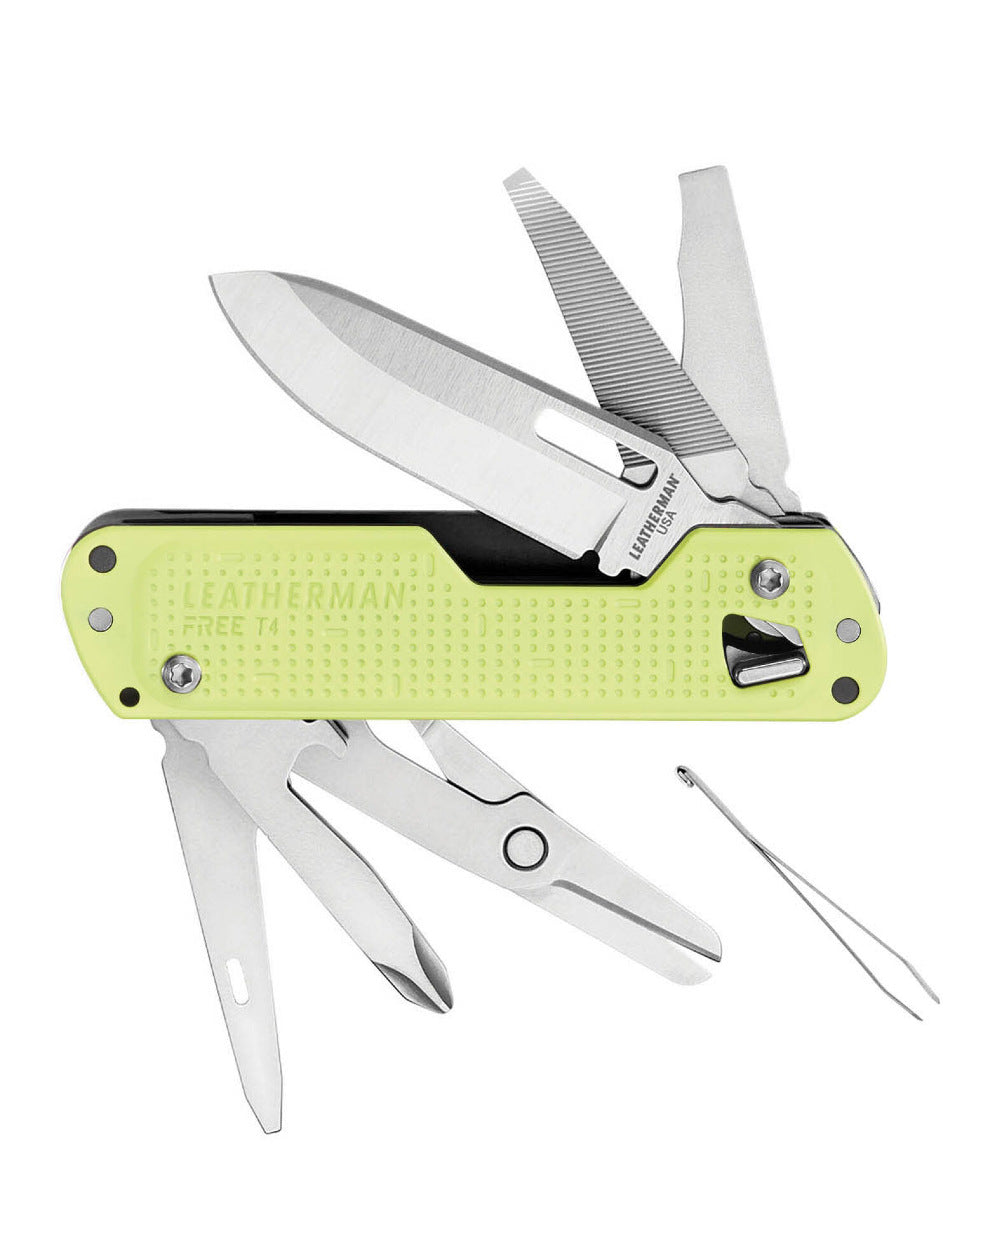 Lunar Coloured Leatherman Free T4 Multi-Tool On A White Background 